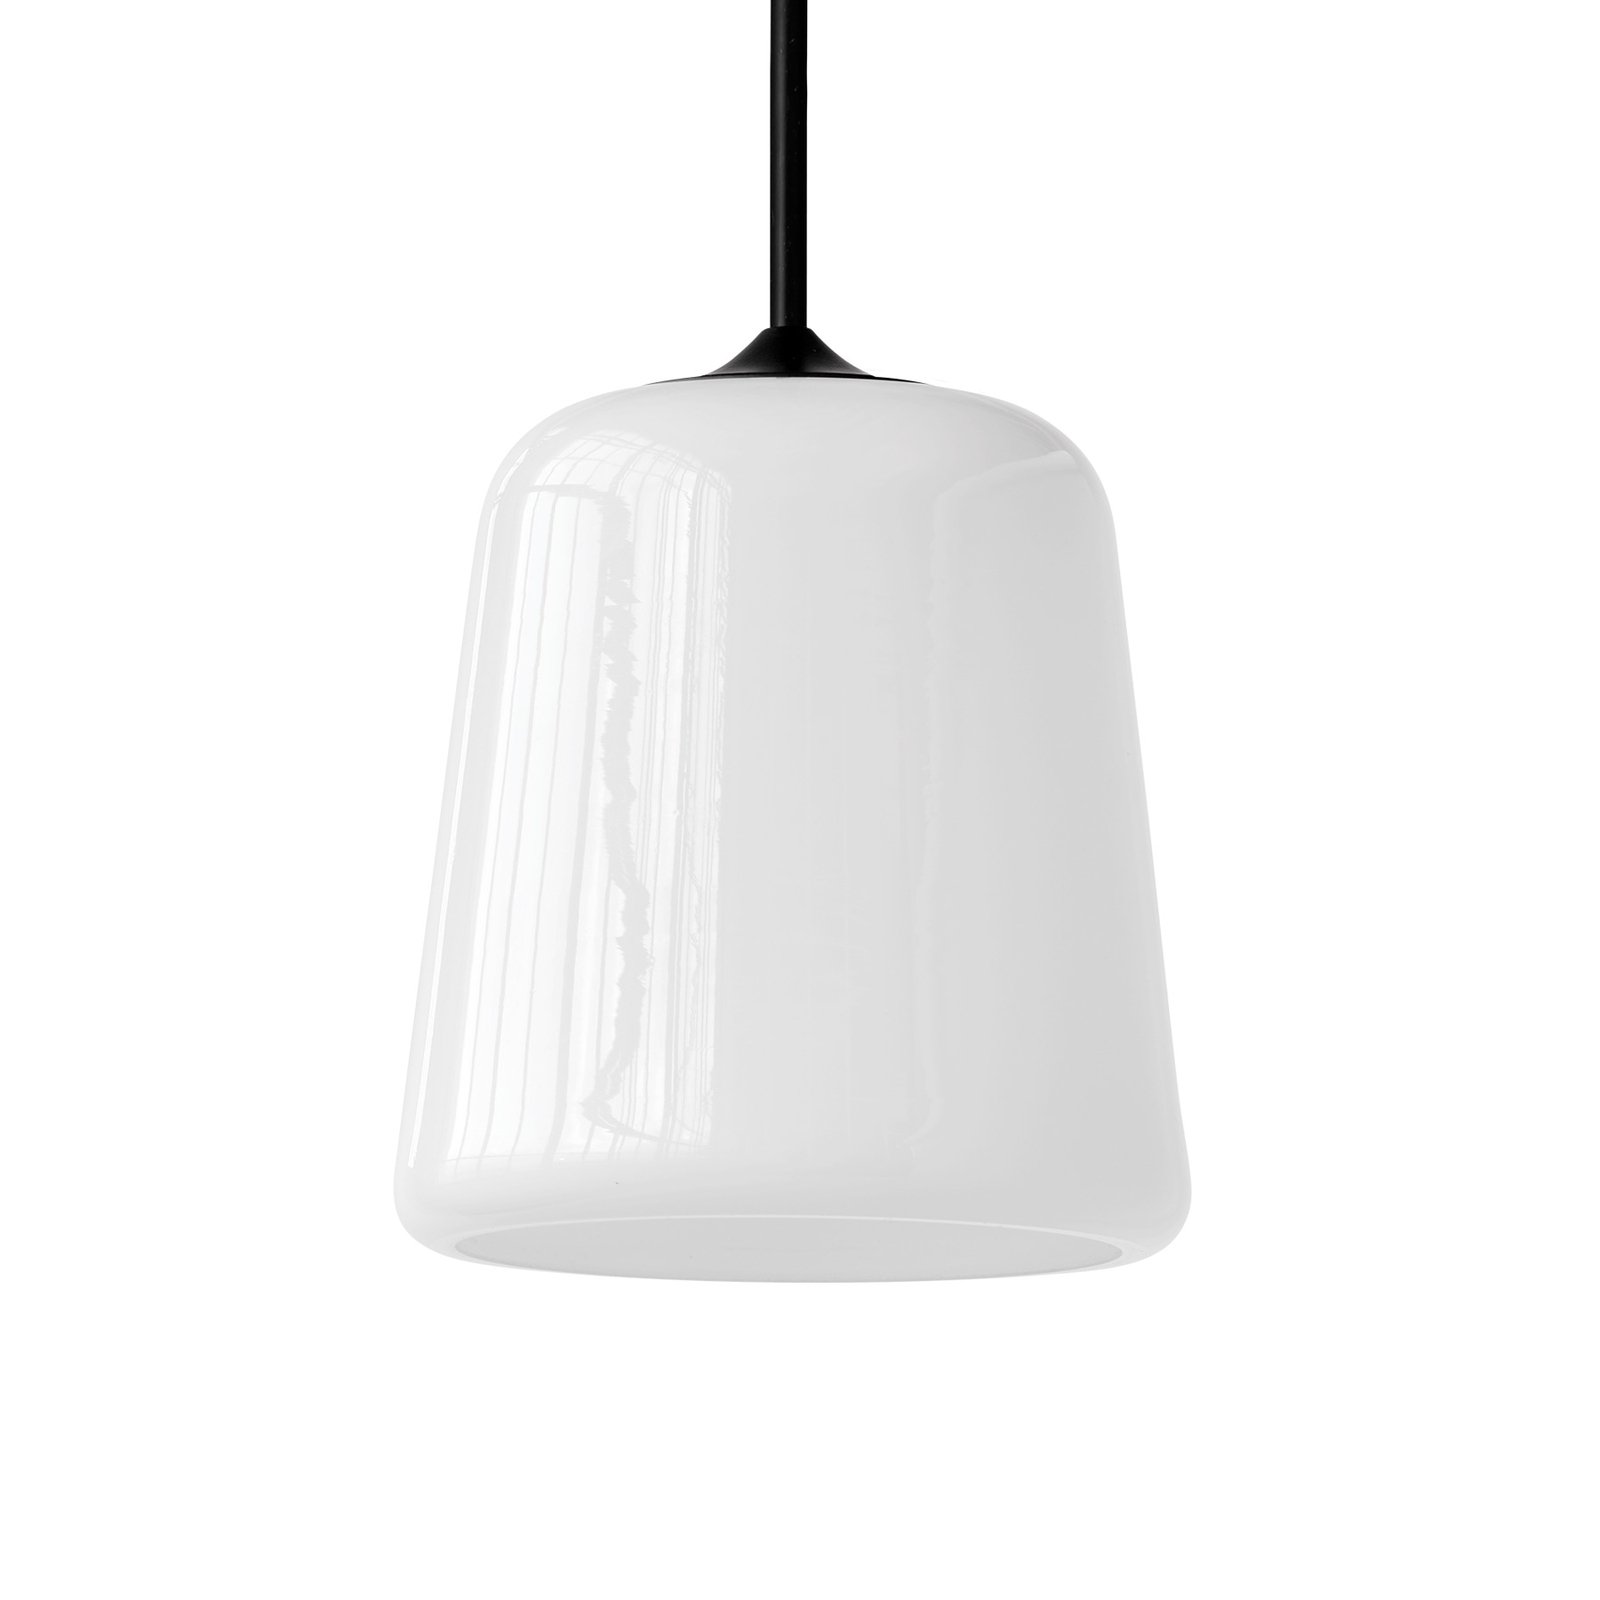 New Works Material New Edition hanglamp opaalglas